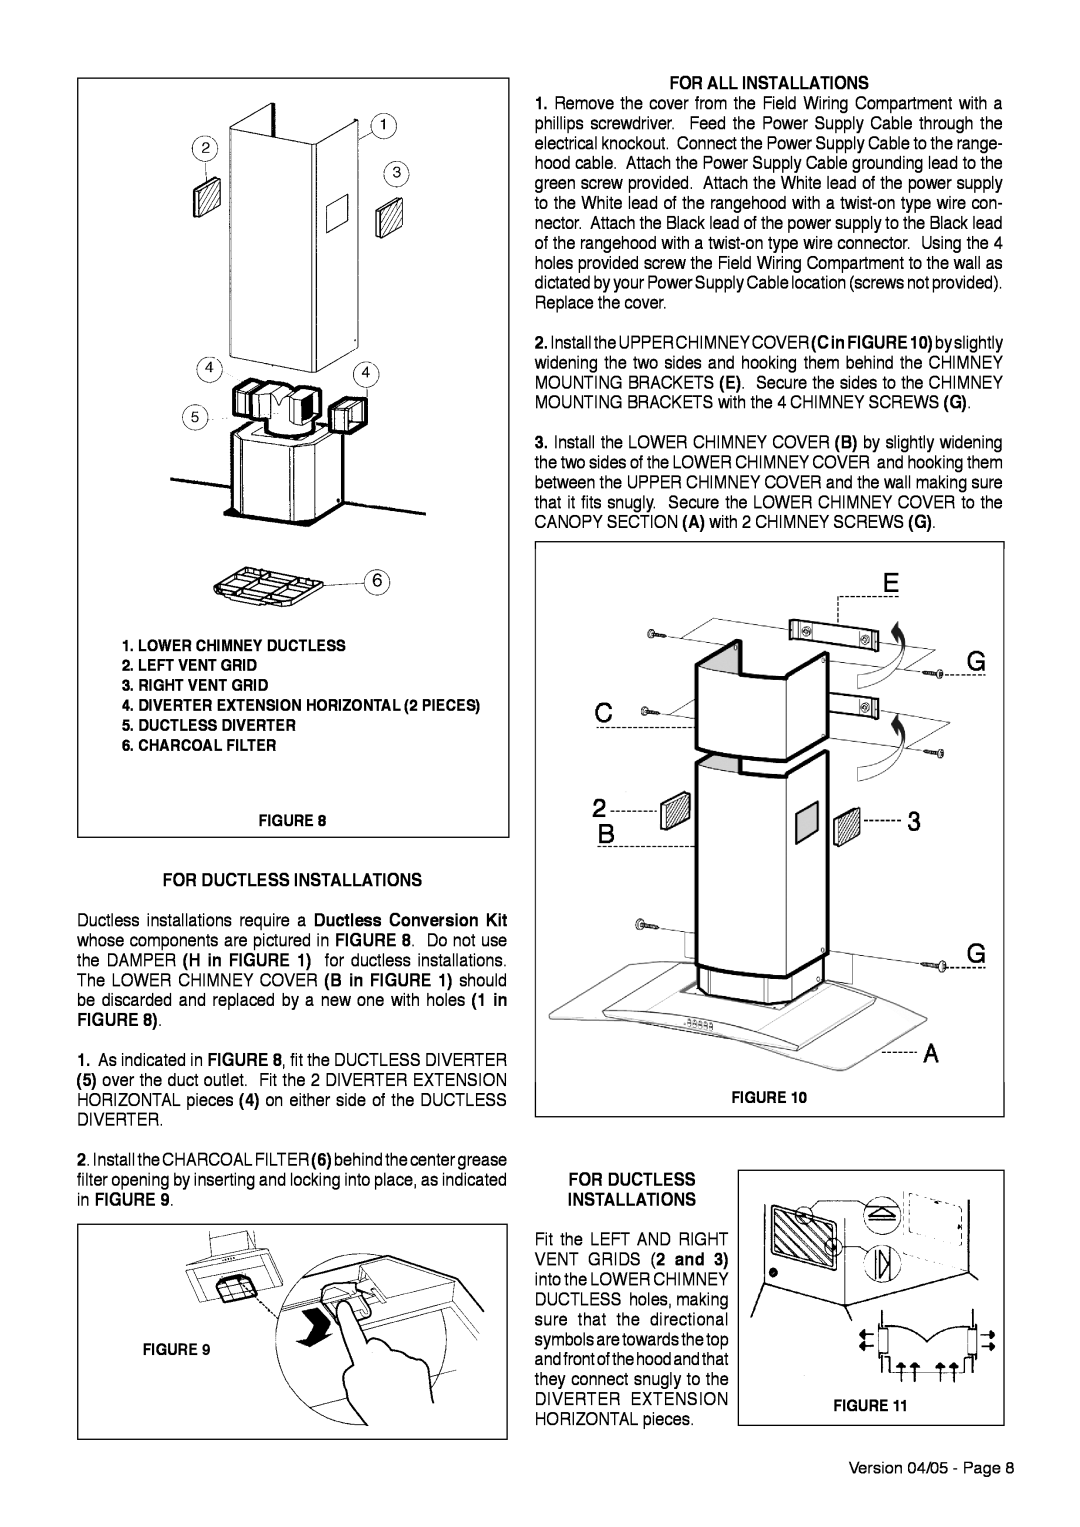 Faber TRATTO installation instructions For Ductless Installations, For All Installations, Charcoal Filter 